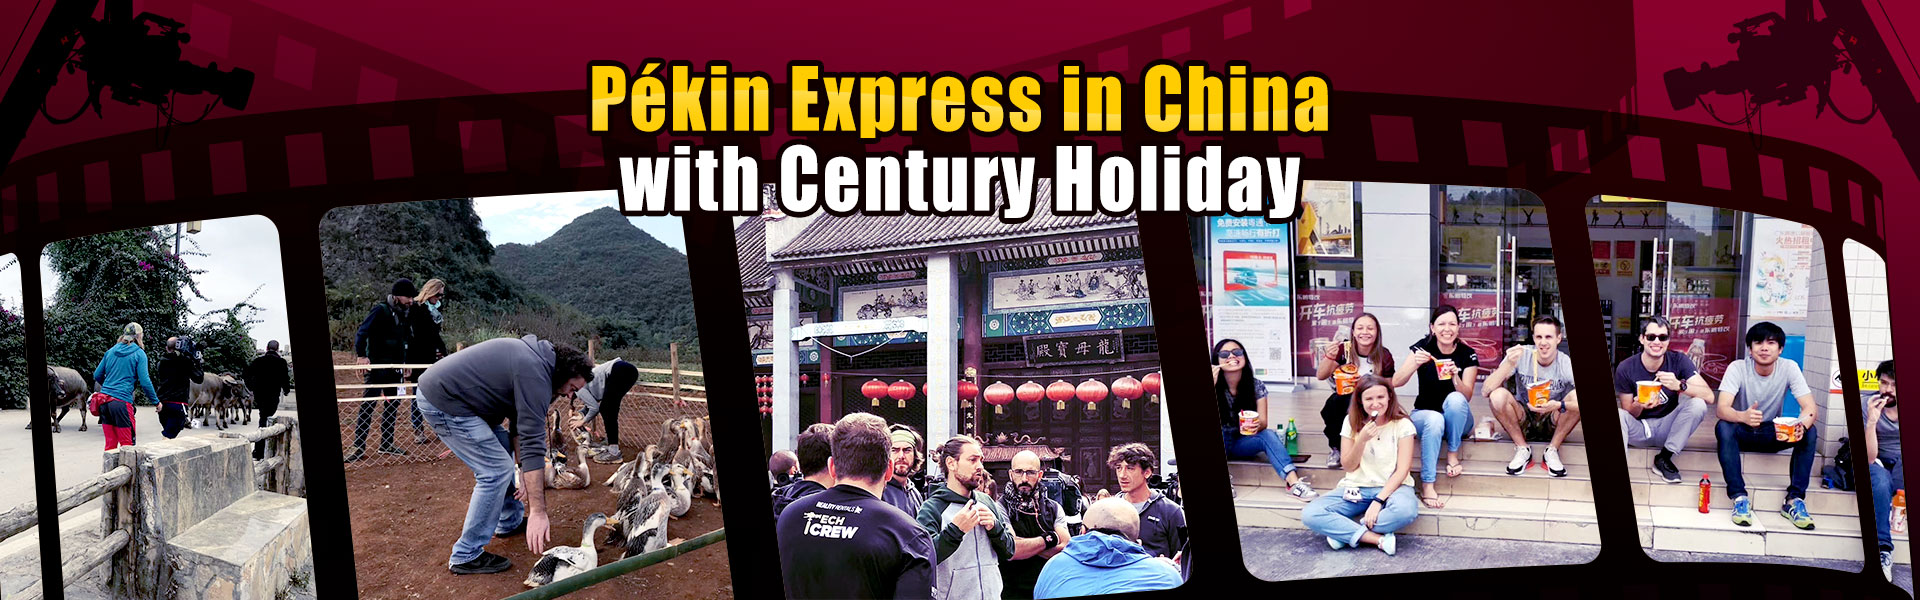 Pékin Express in China with Century Holiday